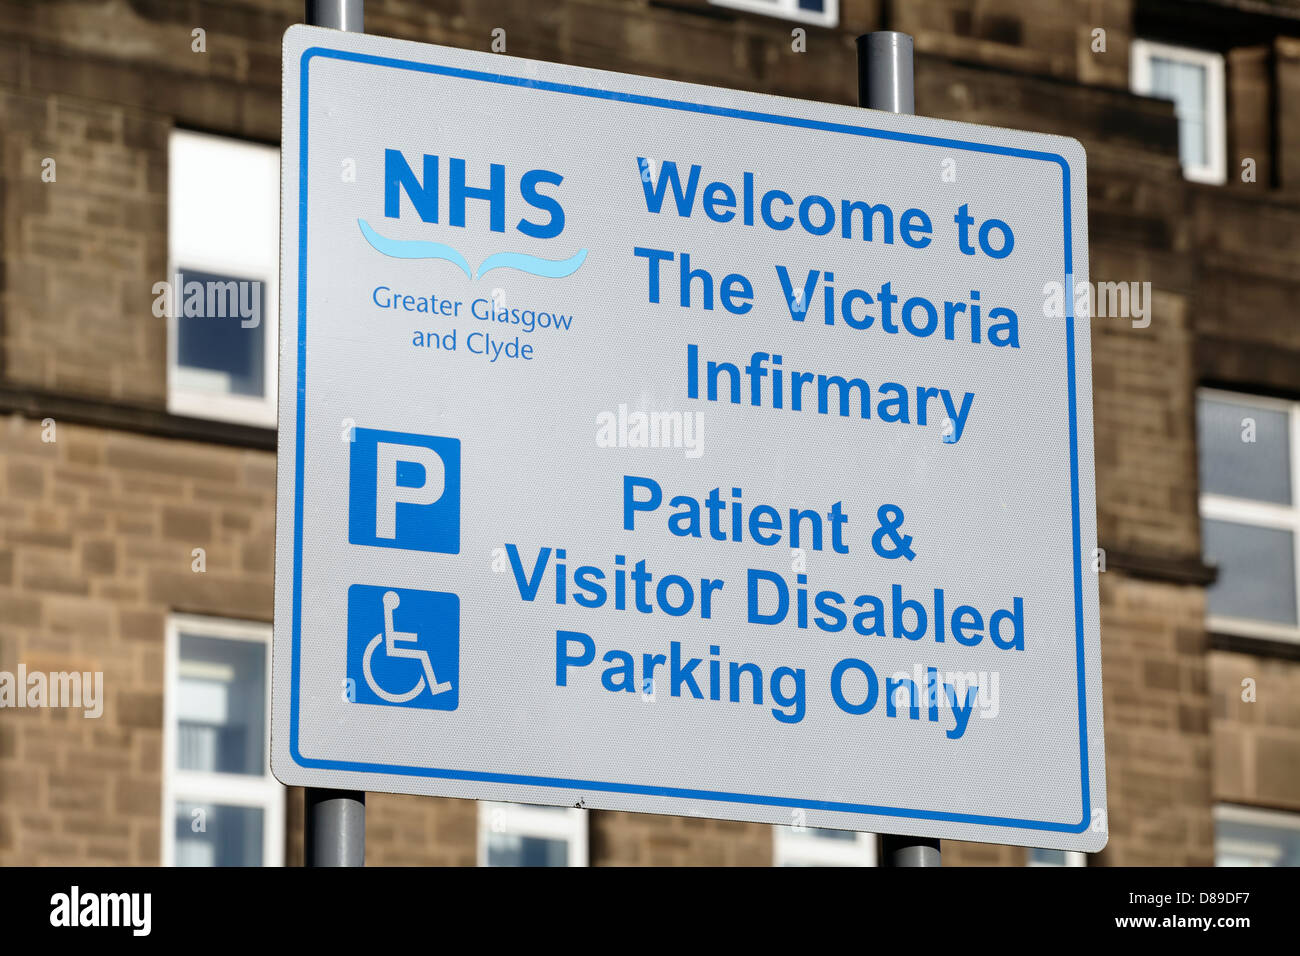 The old Victoria Infirmary is permanently closed. Patient and Visitor Disabled Car Parking sign at the old Victoria Infirmary in Glasgow, Scotland, UK Stock Photo